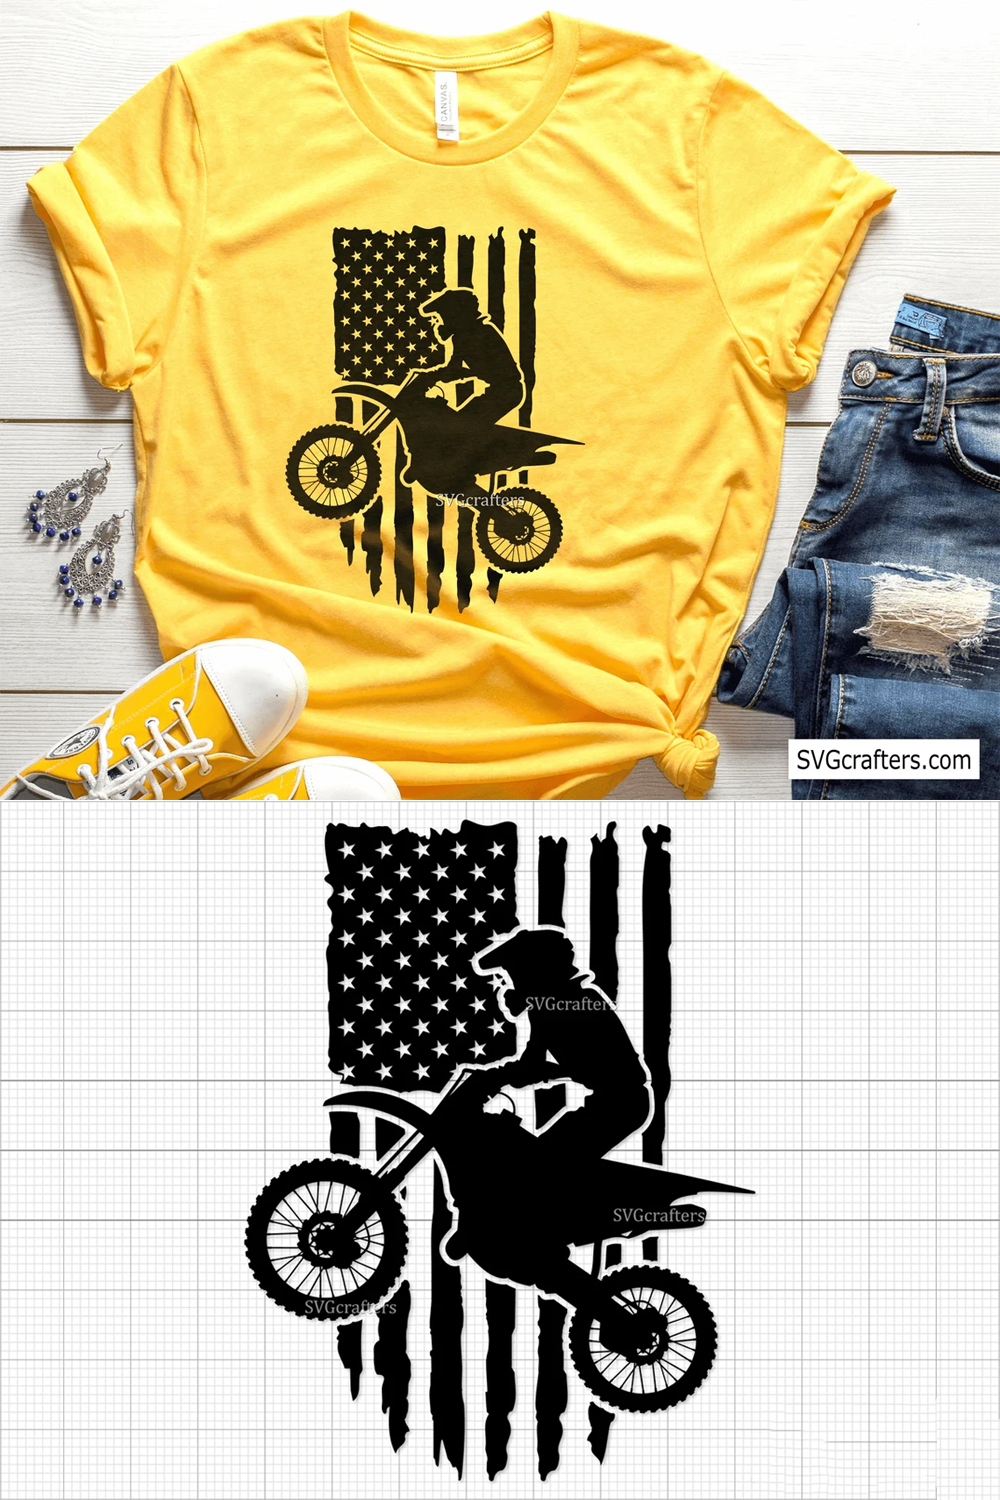 Clothes in a unique style with a motorcycle theme.